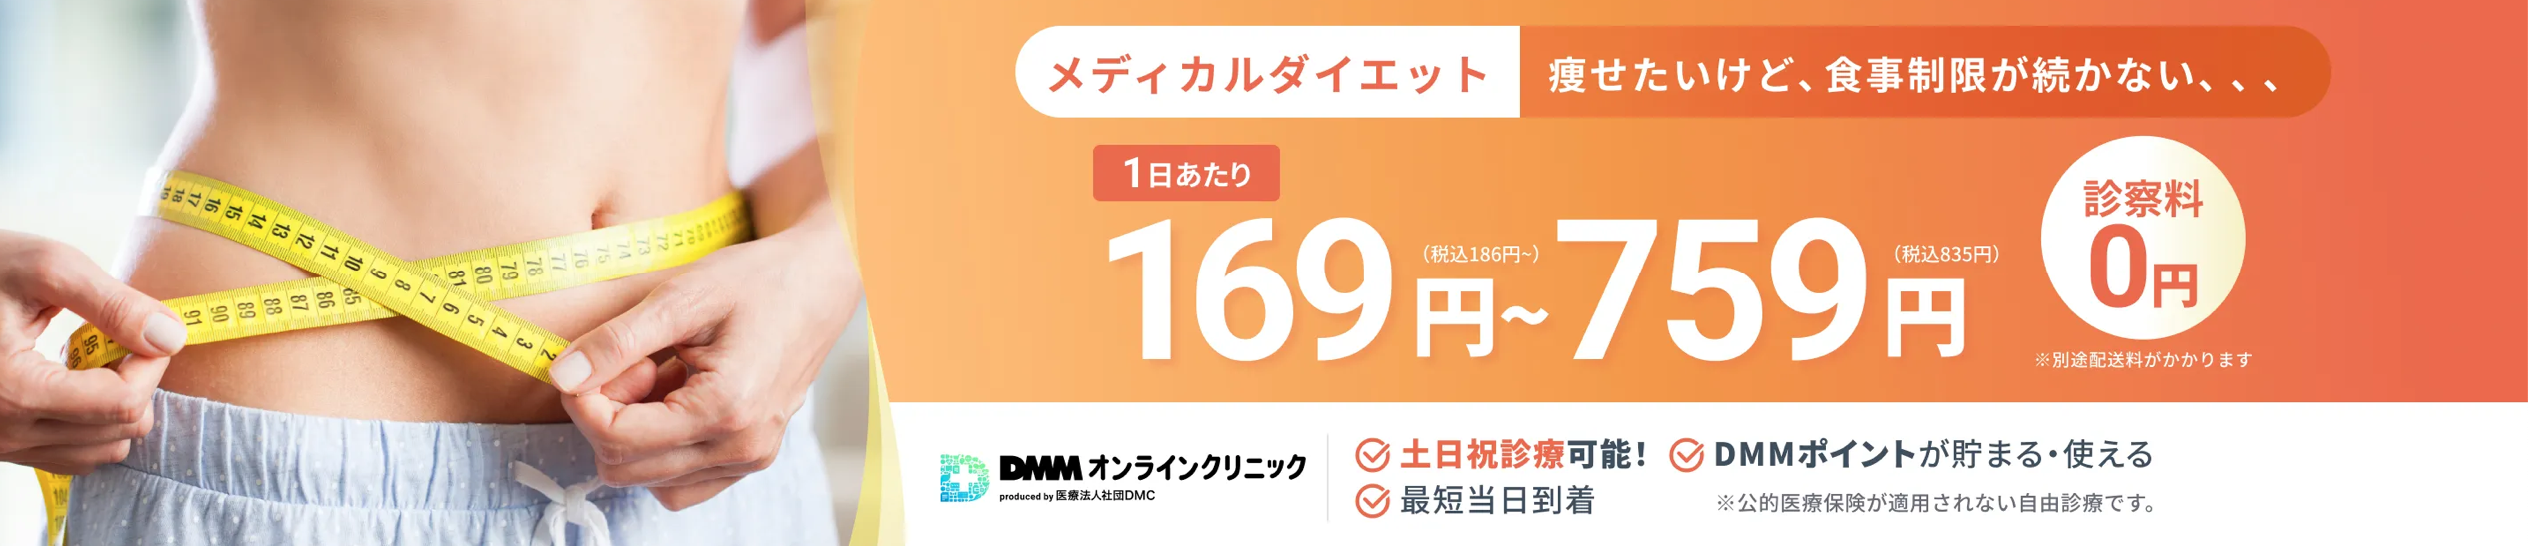 DMM 医療ダイエット